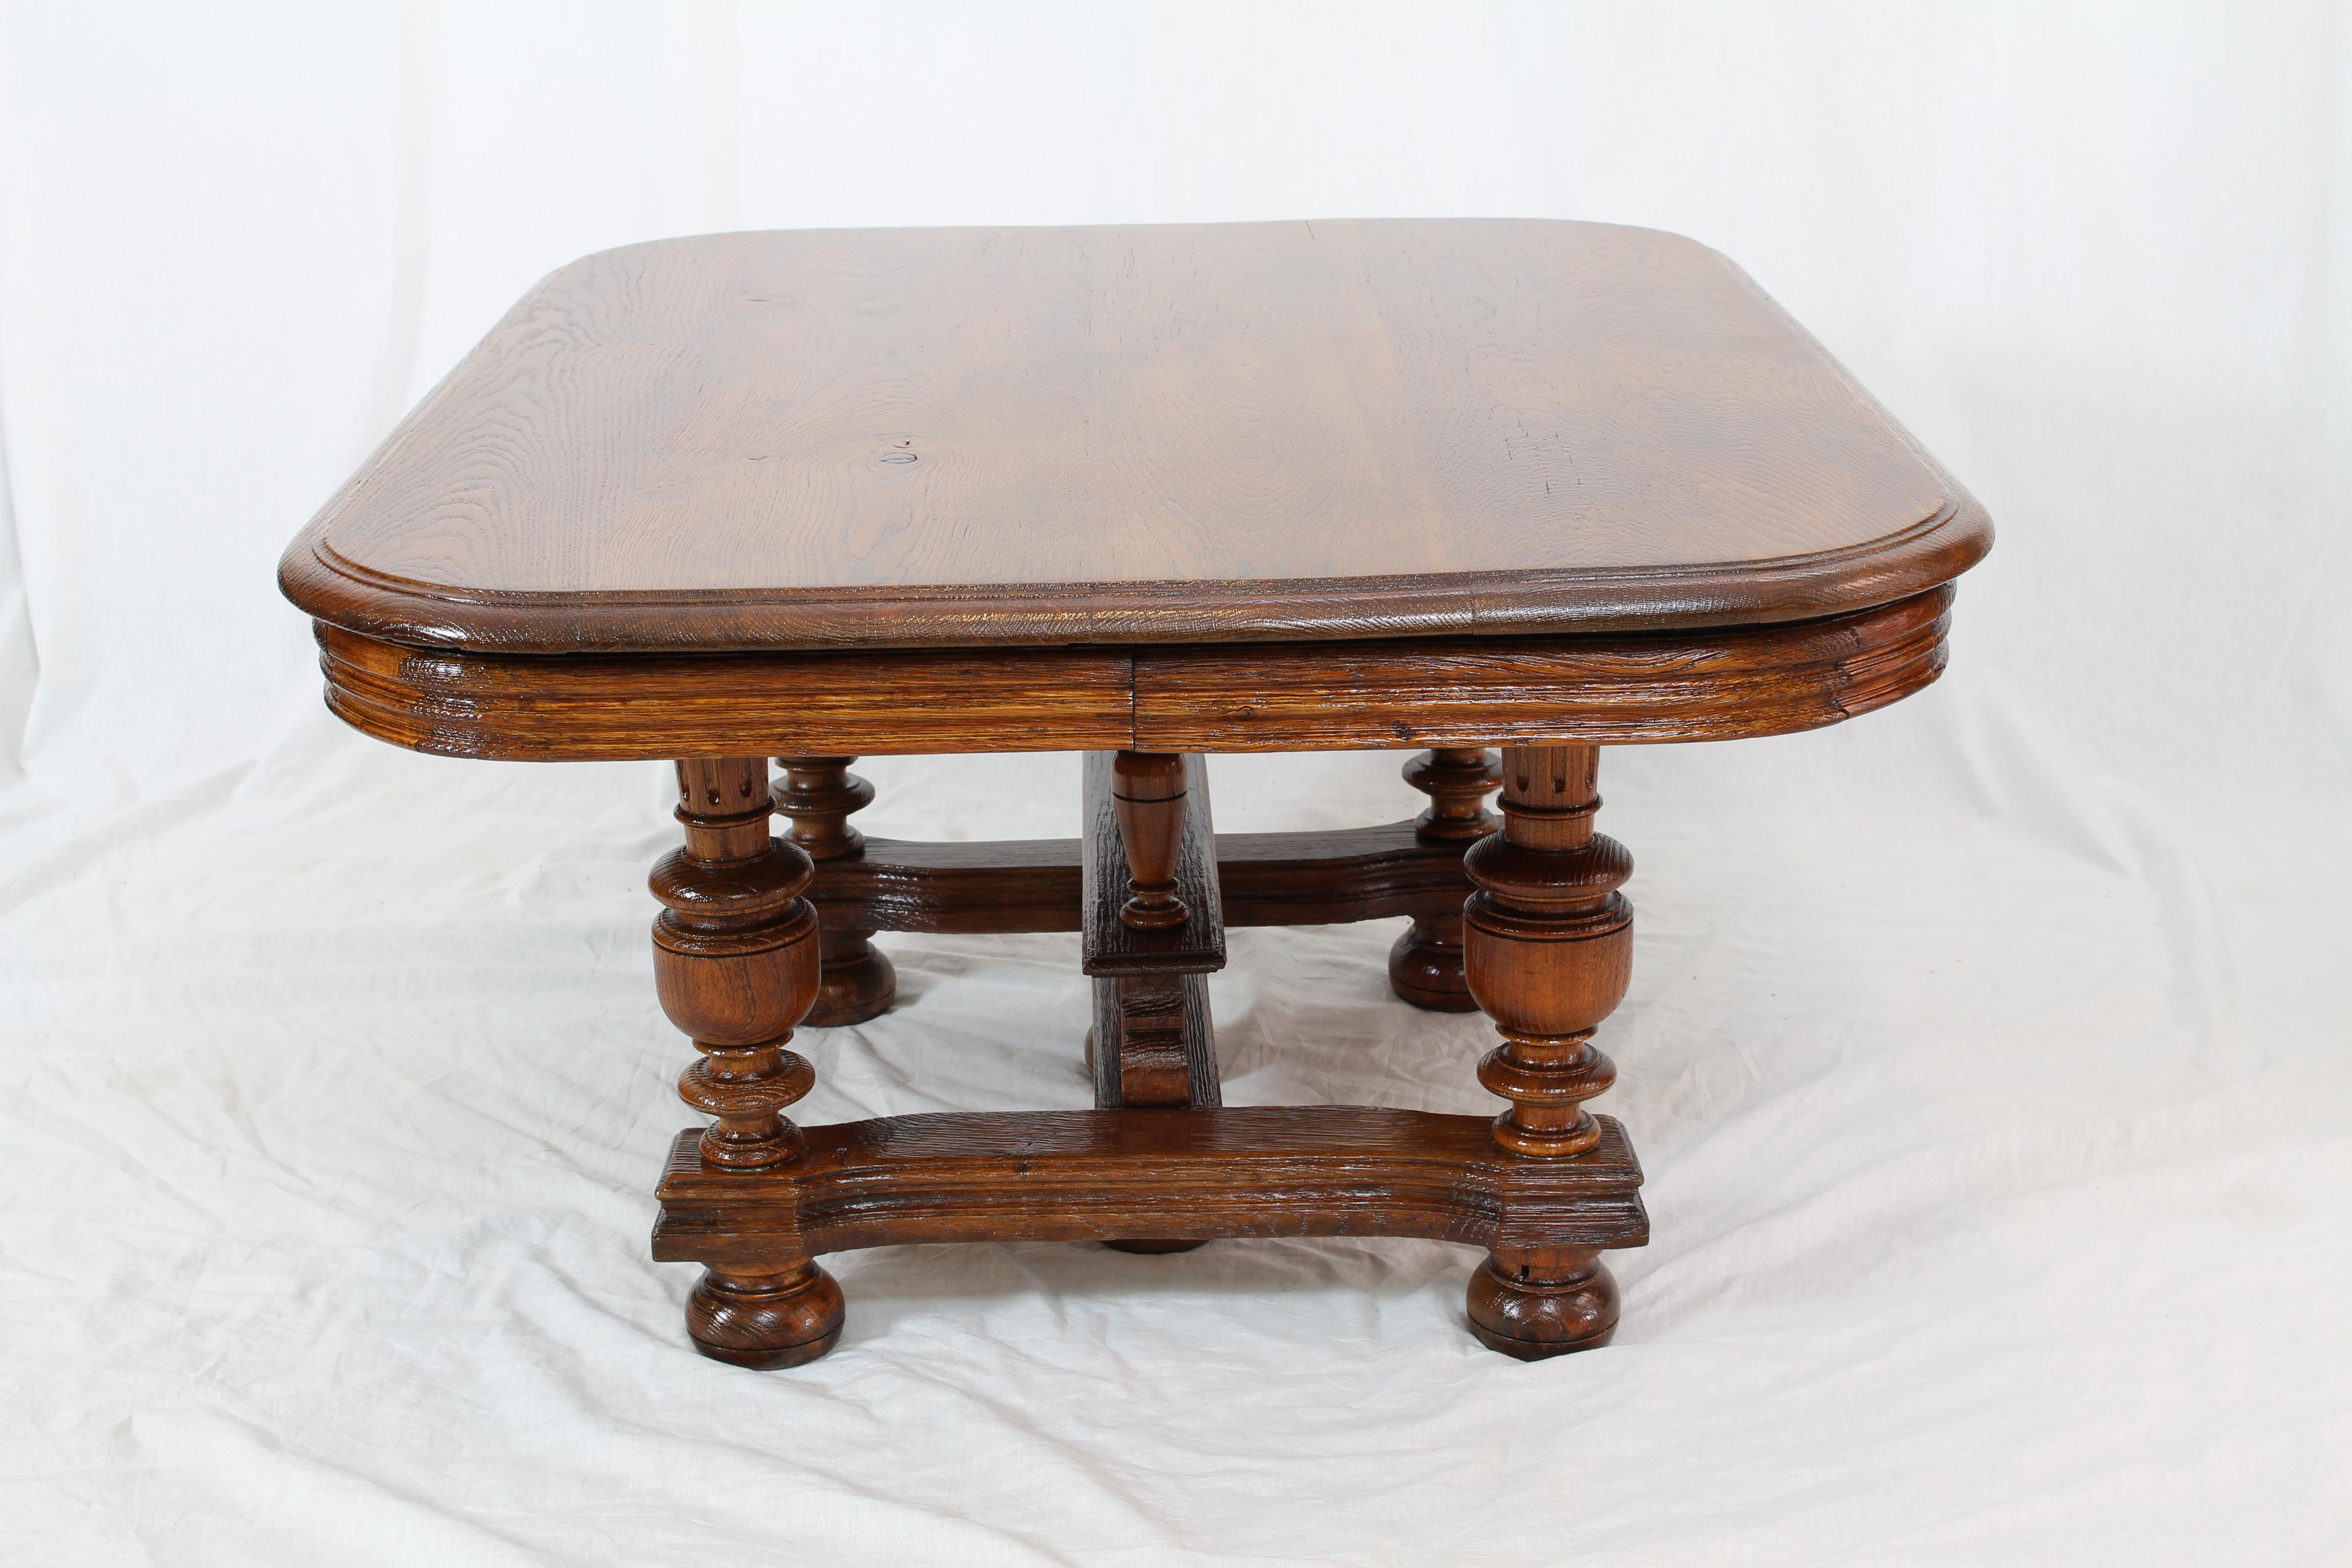 Couch table from the time of Henry Deux, circa 1880 from France in solid oakwood. In very good restored condition.
Very nice low table, good proportions.